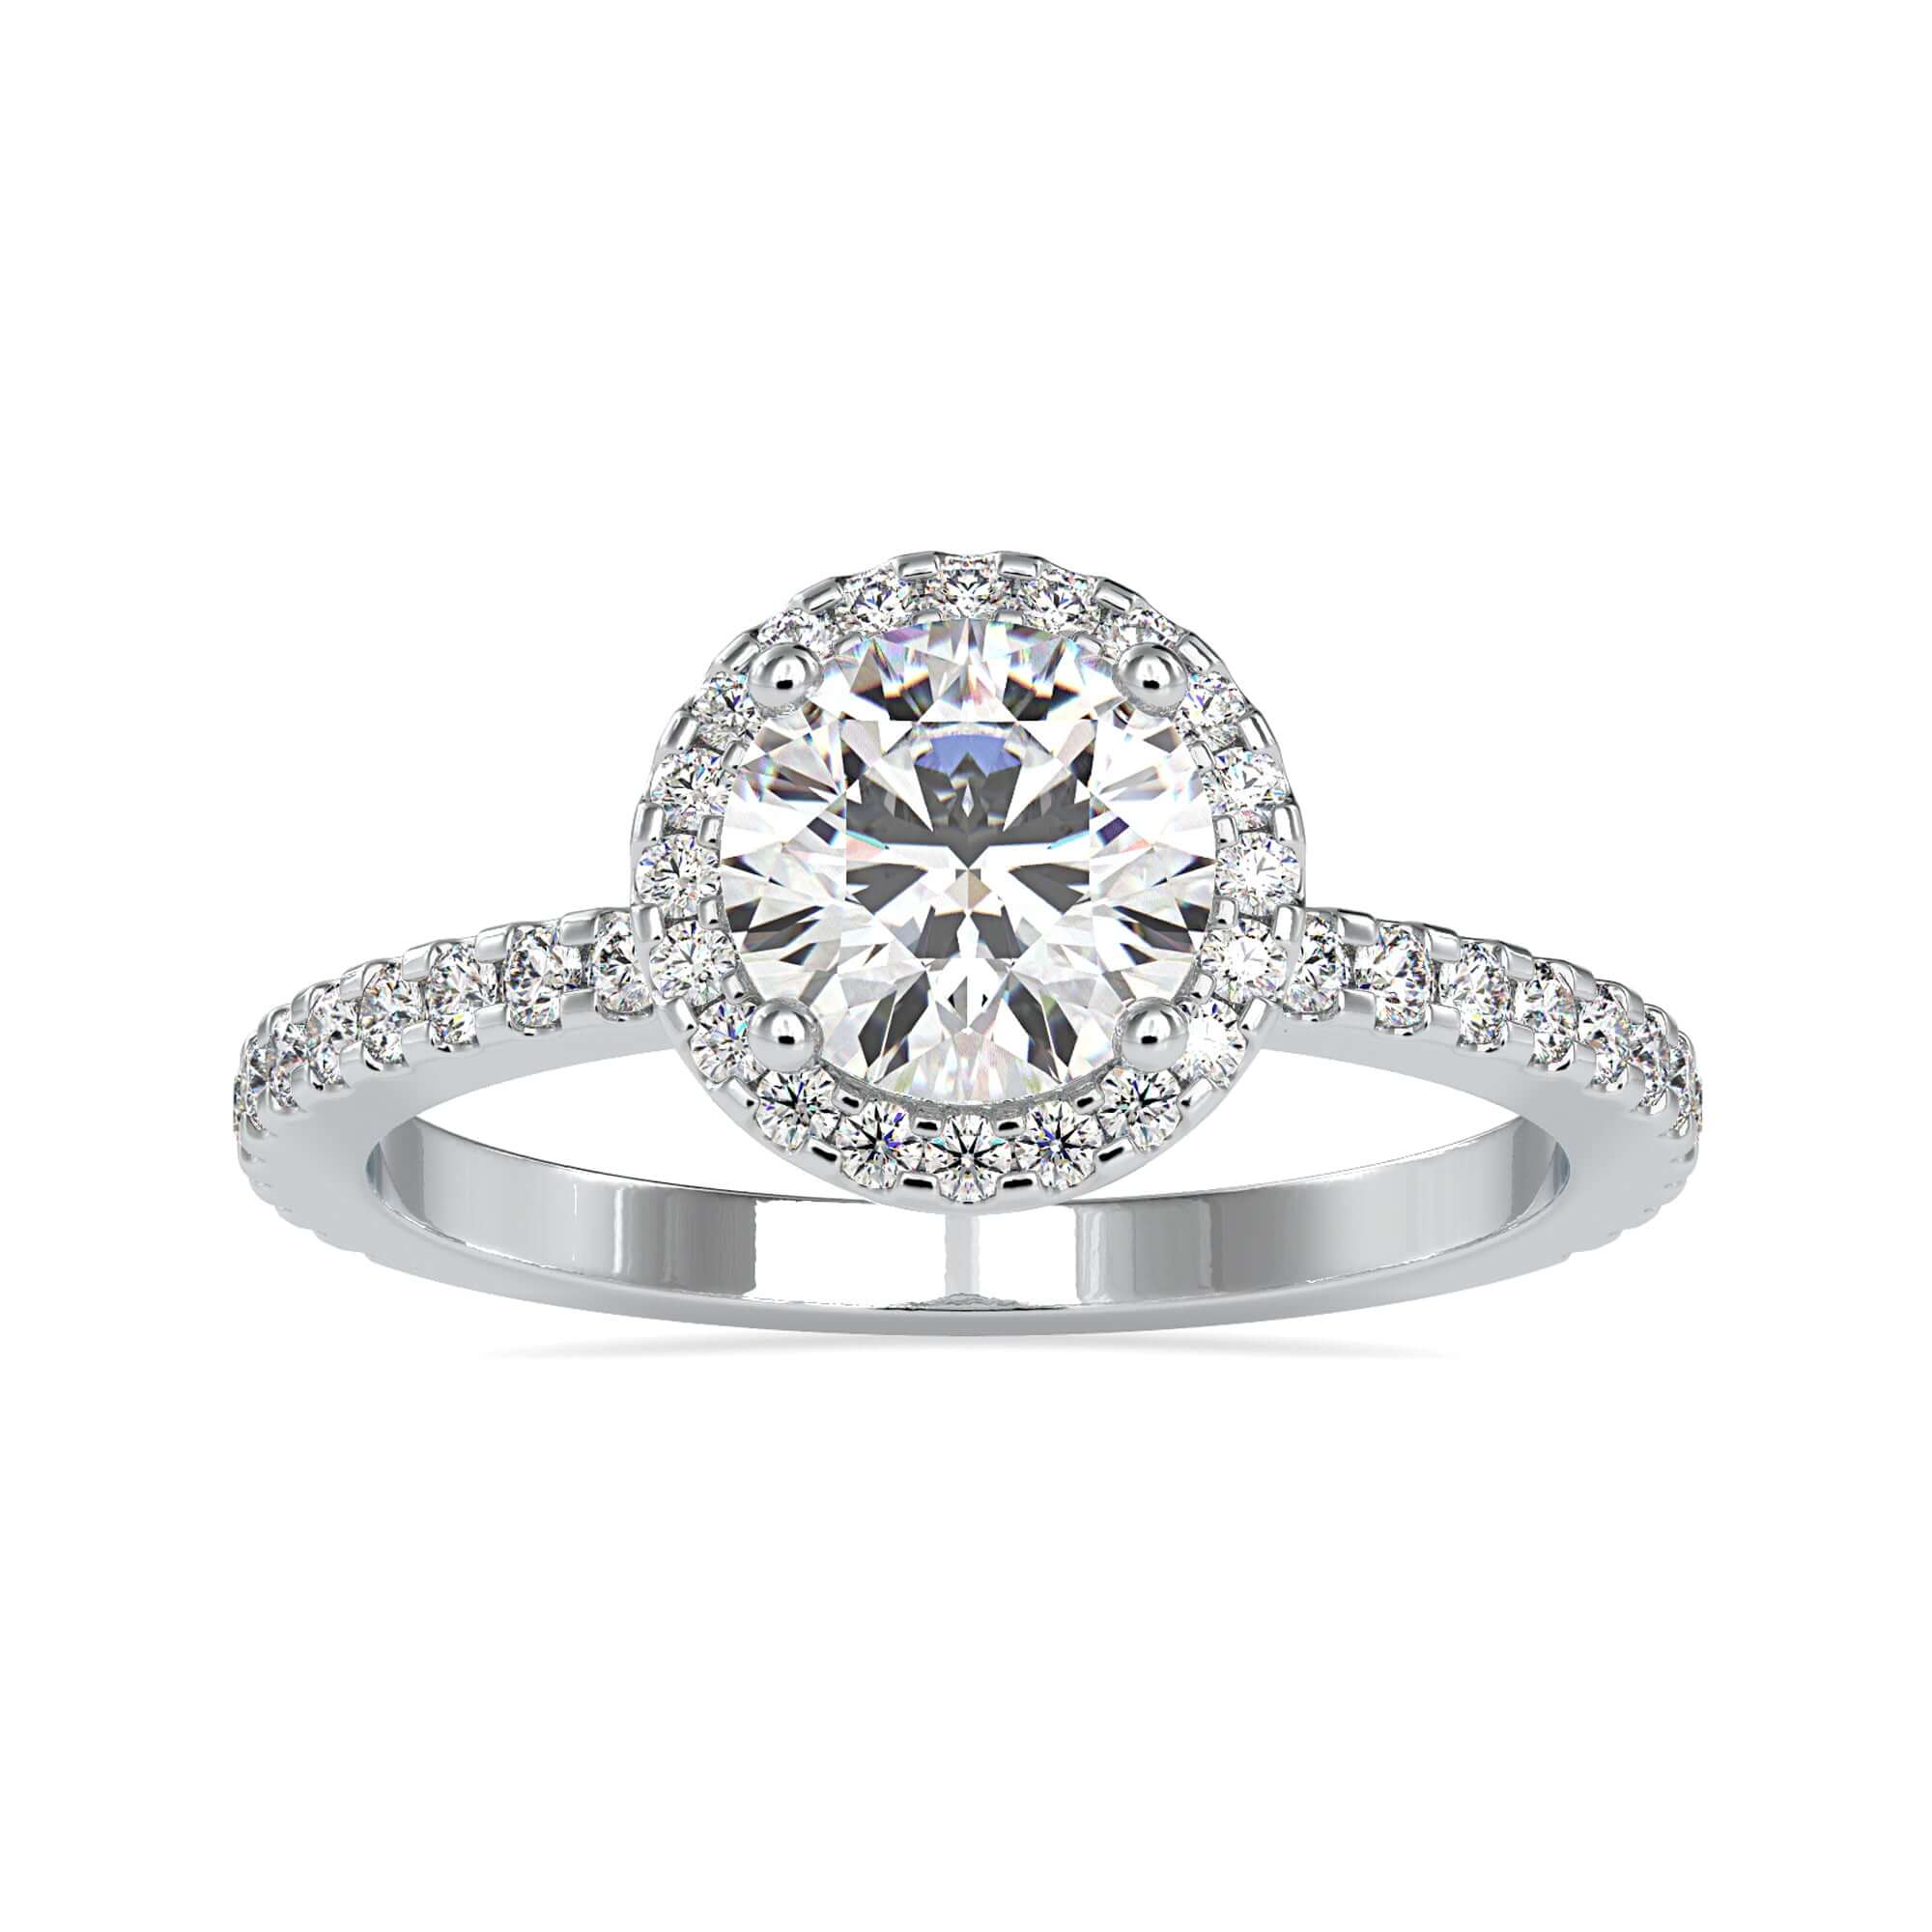 1.46 TCW Hidden Halo Pave Set Round Cut Moissanite Engagement Ring